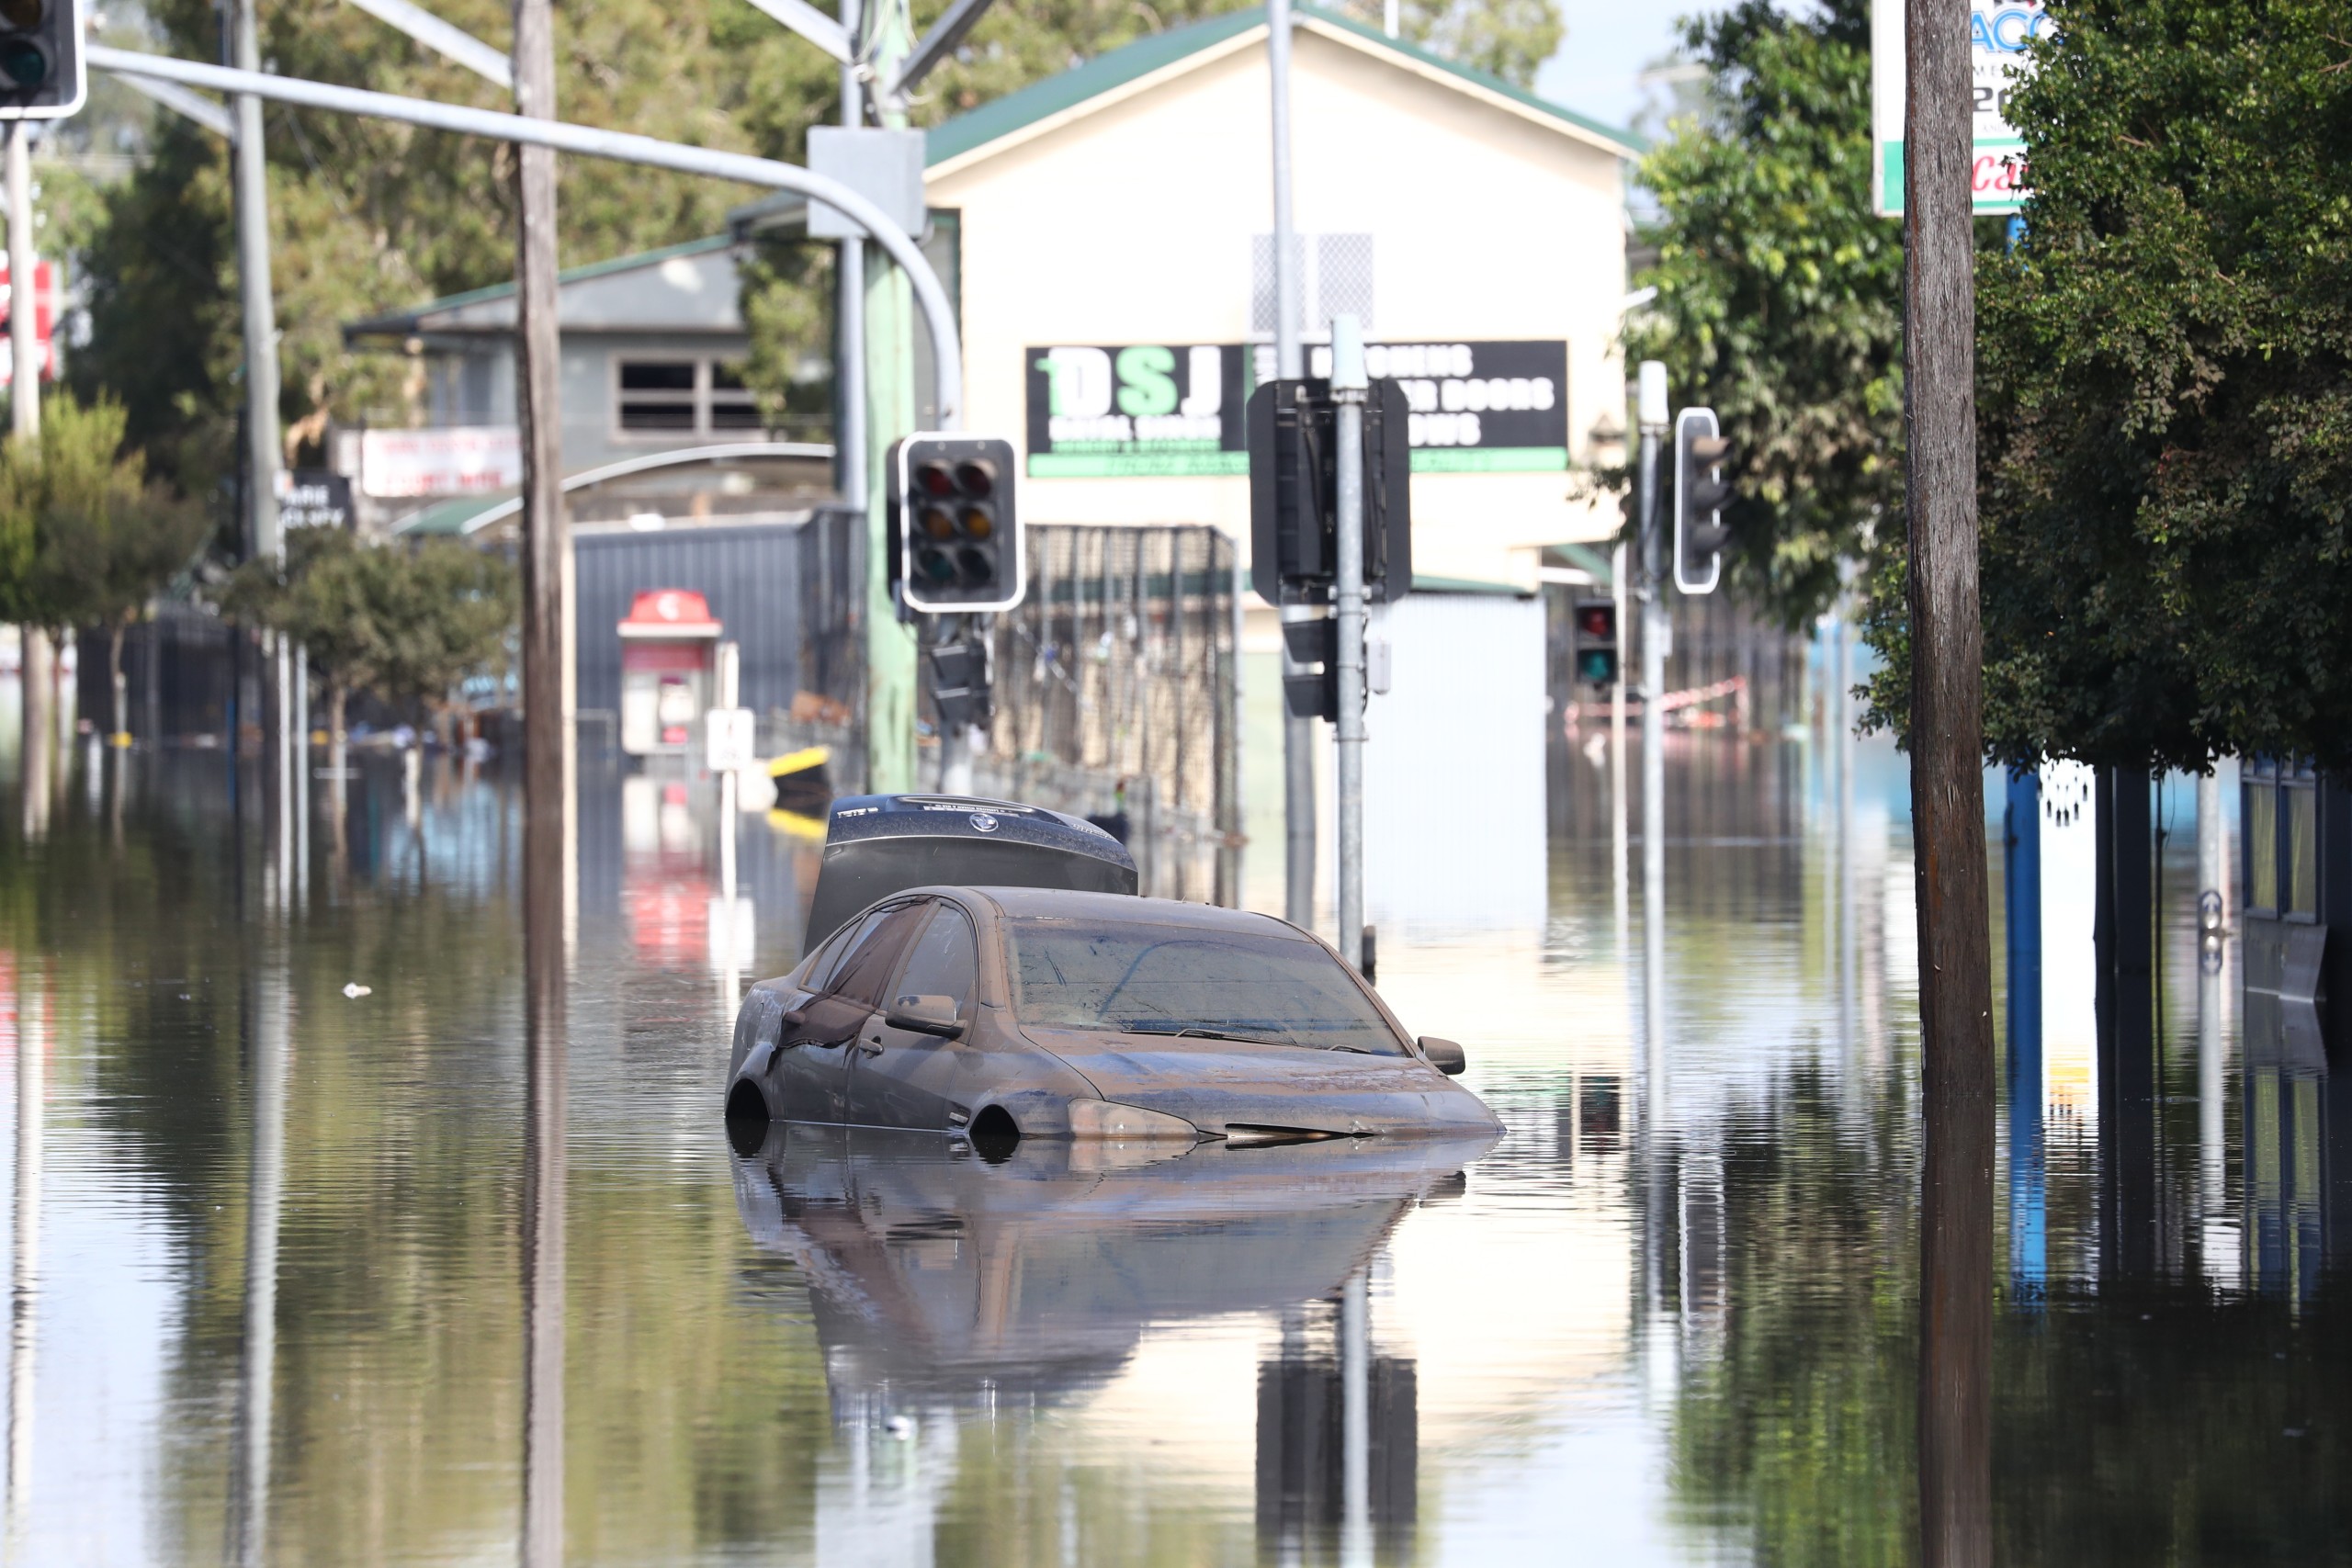 epa09794906 A submerged car in Lismore, New South Wales (NSW), Australia, 02 March 2022. Interstate emergency service volunteers are on their way to northern NSW amid disastrous flooding, while Sydney braces for torrential rain that could lead to more flooding.  EPA/JASON O’BRIEN  AUSTRALIA AND NEW ZEALAND OUT